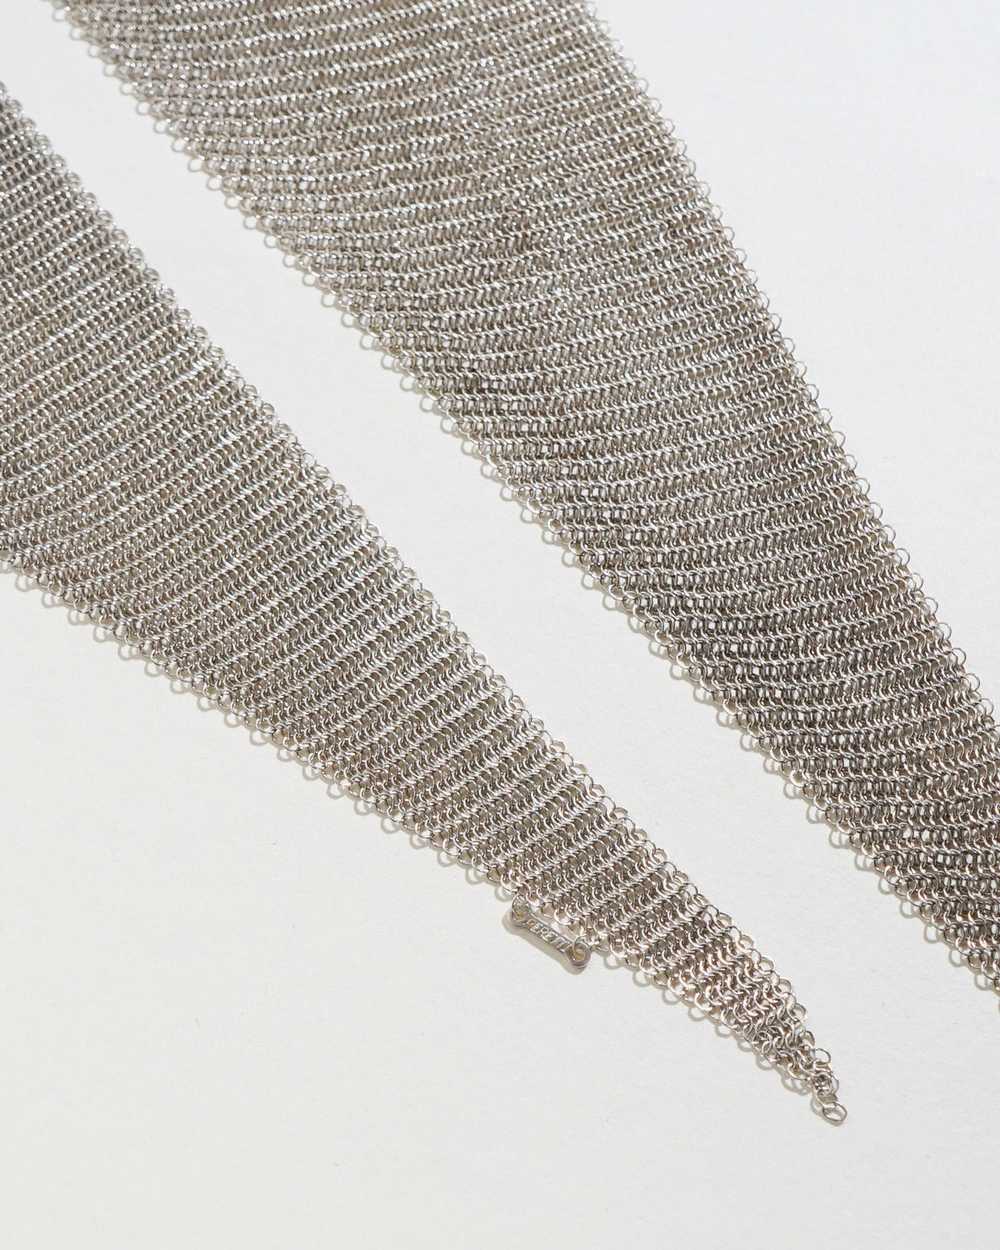 Silver Mesh Scarf Necklace - image 8